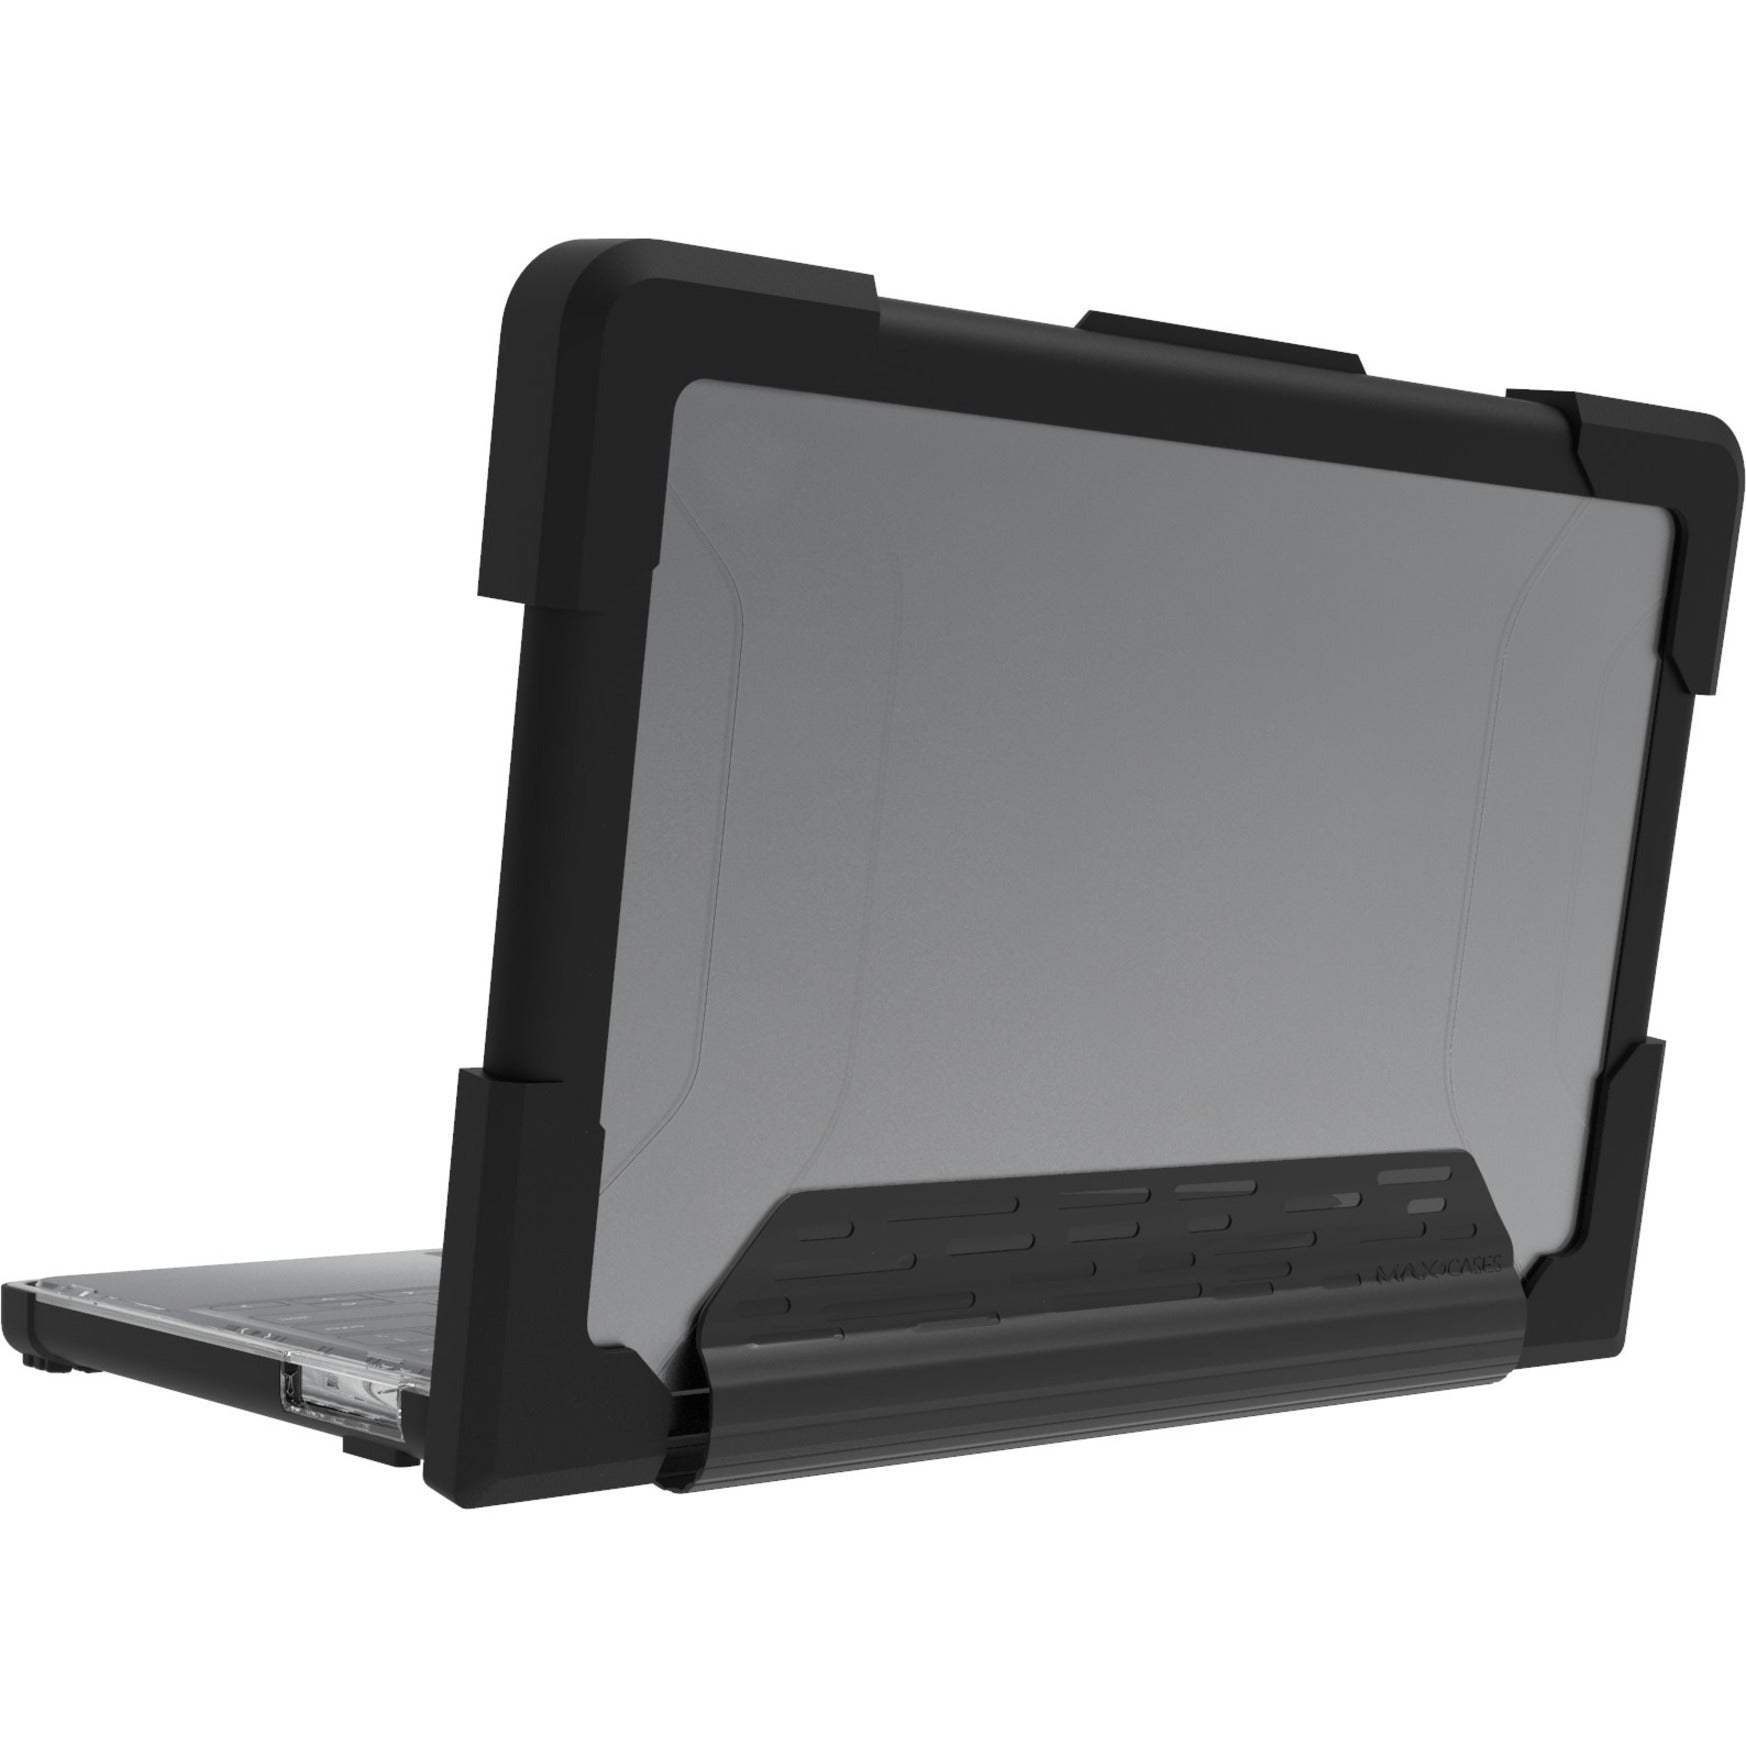 MAXCases HP-ESS-G5EE-14-BLK Extreme Shell-S for HP G5 EE Chromebook Clamshell 14" (Black), Drop Resistant, Scratch Resistant, Impact Resistant, Damage Resistant, Ding Resistant, Bump Resistant, Anti-slip